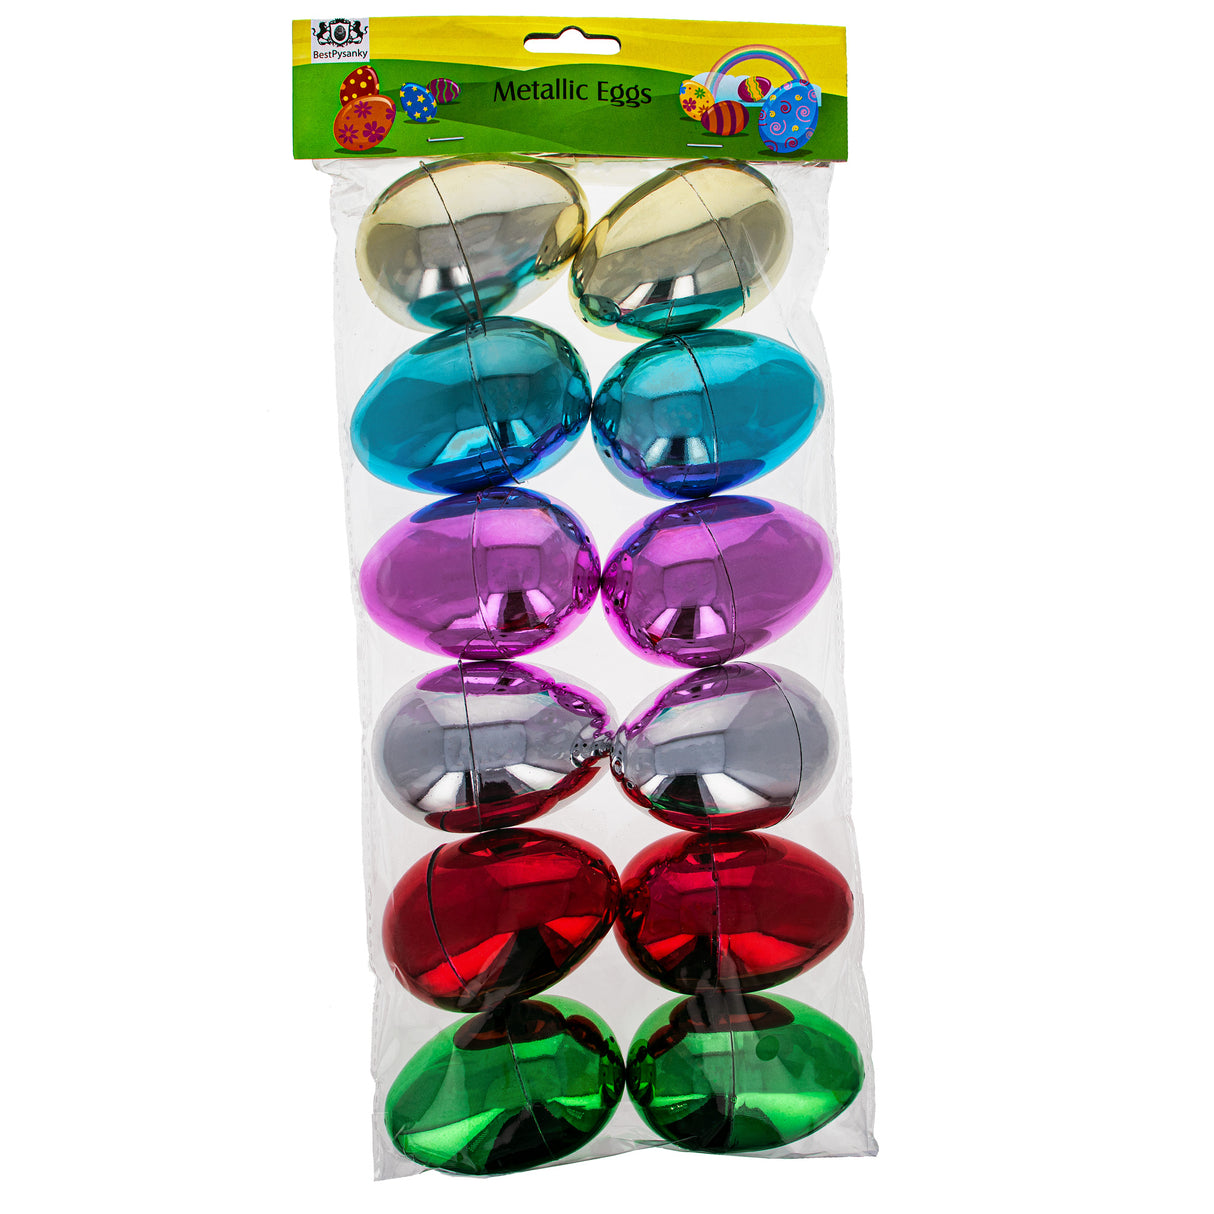 Shiny Metallic Easter Eggs: Set of 12 Multicolored Plastic Eggs, 3.05 Inches ,dimensions in inches: 3.05 x 15 x 2.1